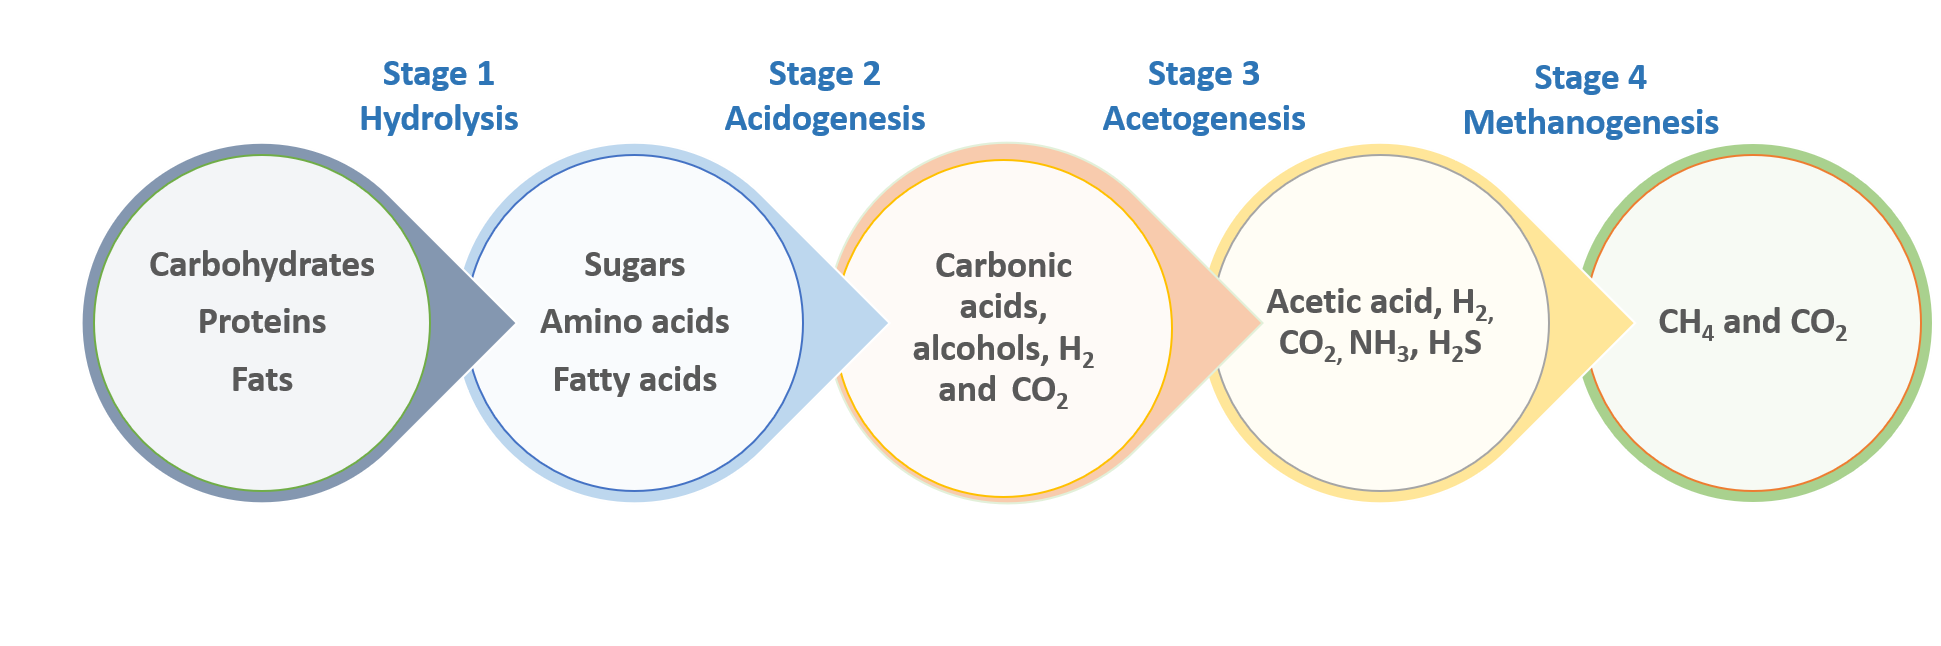 The four stages of anaerobic digestion